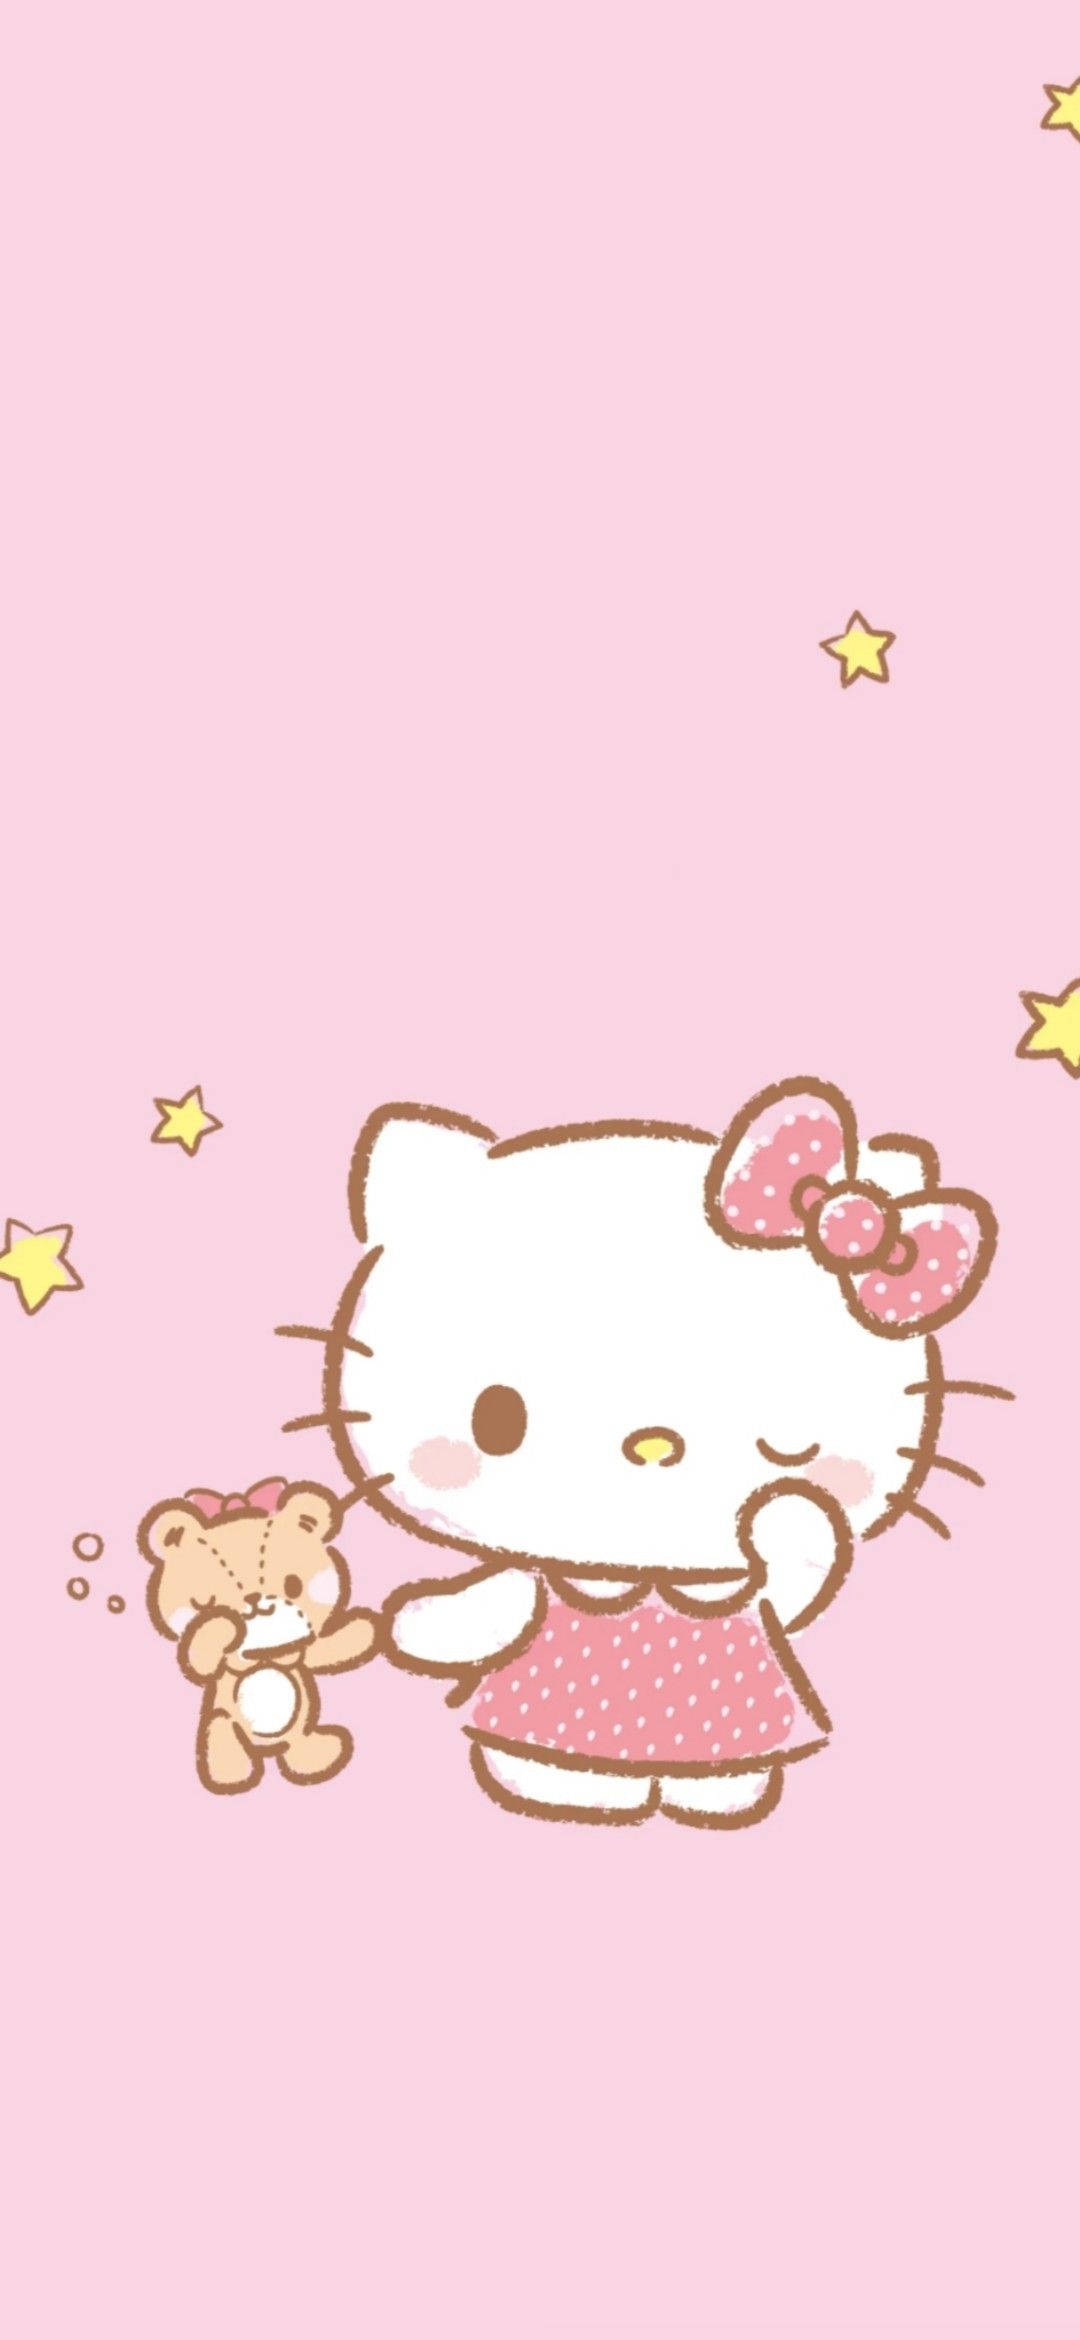 ✿✿, Hello kitty wallpaper Credit to the owner